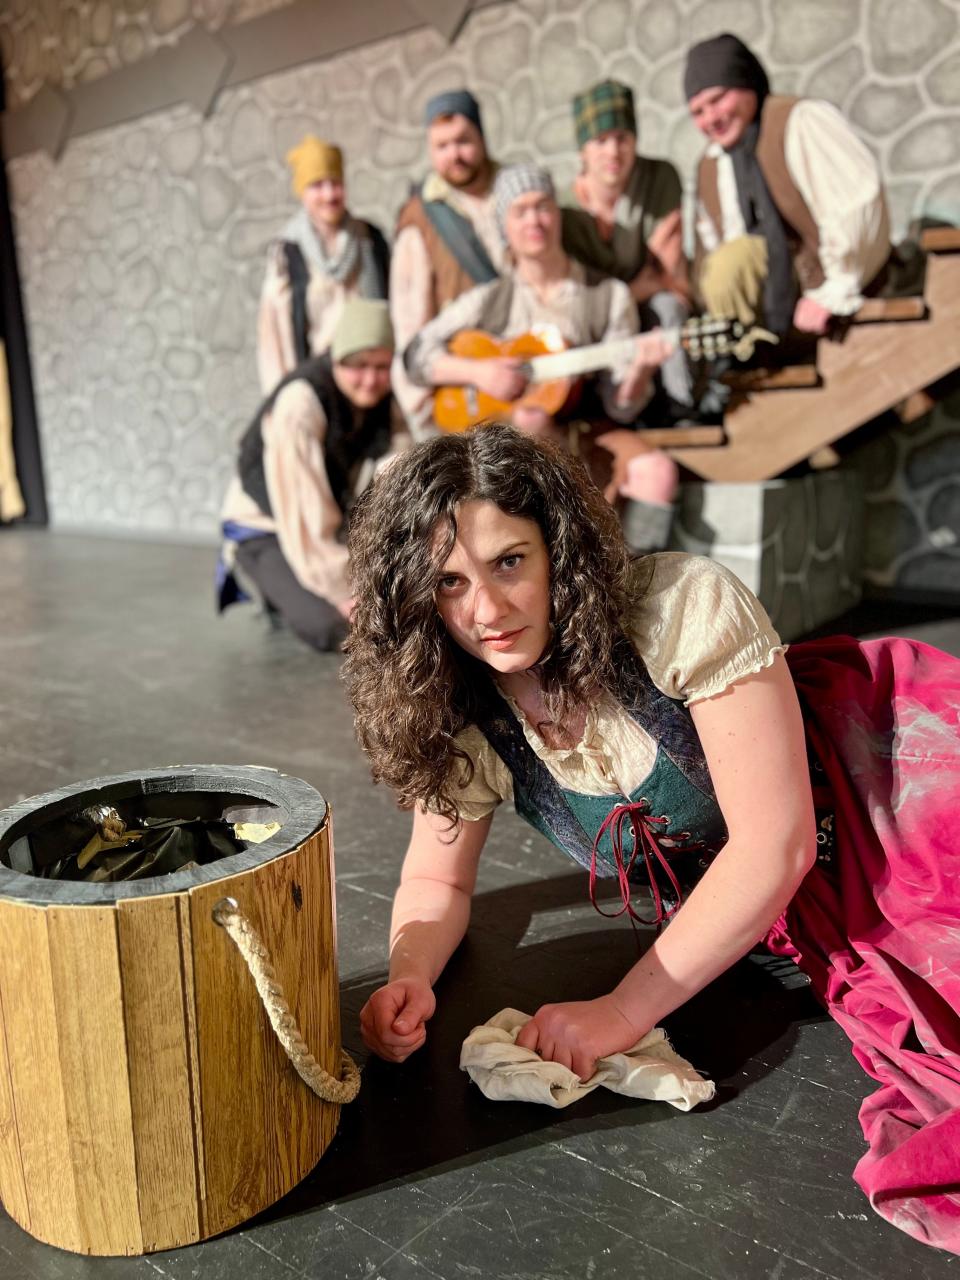 Aldonza (Hannah Starcher) is serenaded by Muleteers (L to R) Billy Saunders, Mikey Schrum, Alex Hazen, Scott Thompson, Simon Burkhammer (kneeling) and Aaron Shanor (with guitar) in Center Theatre Players' "Man of La Mancha."